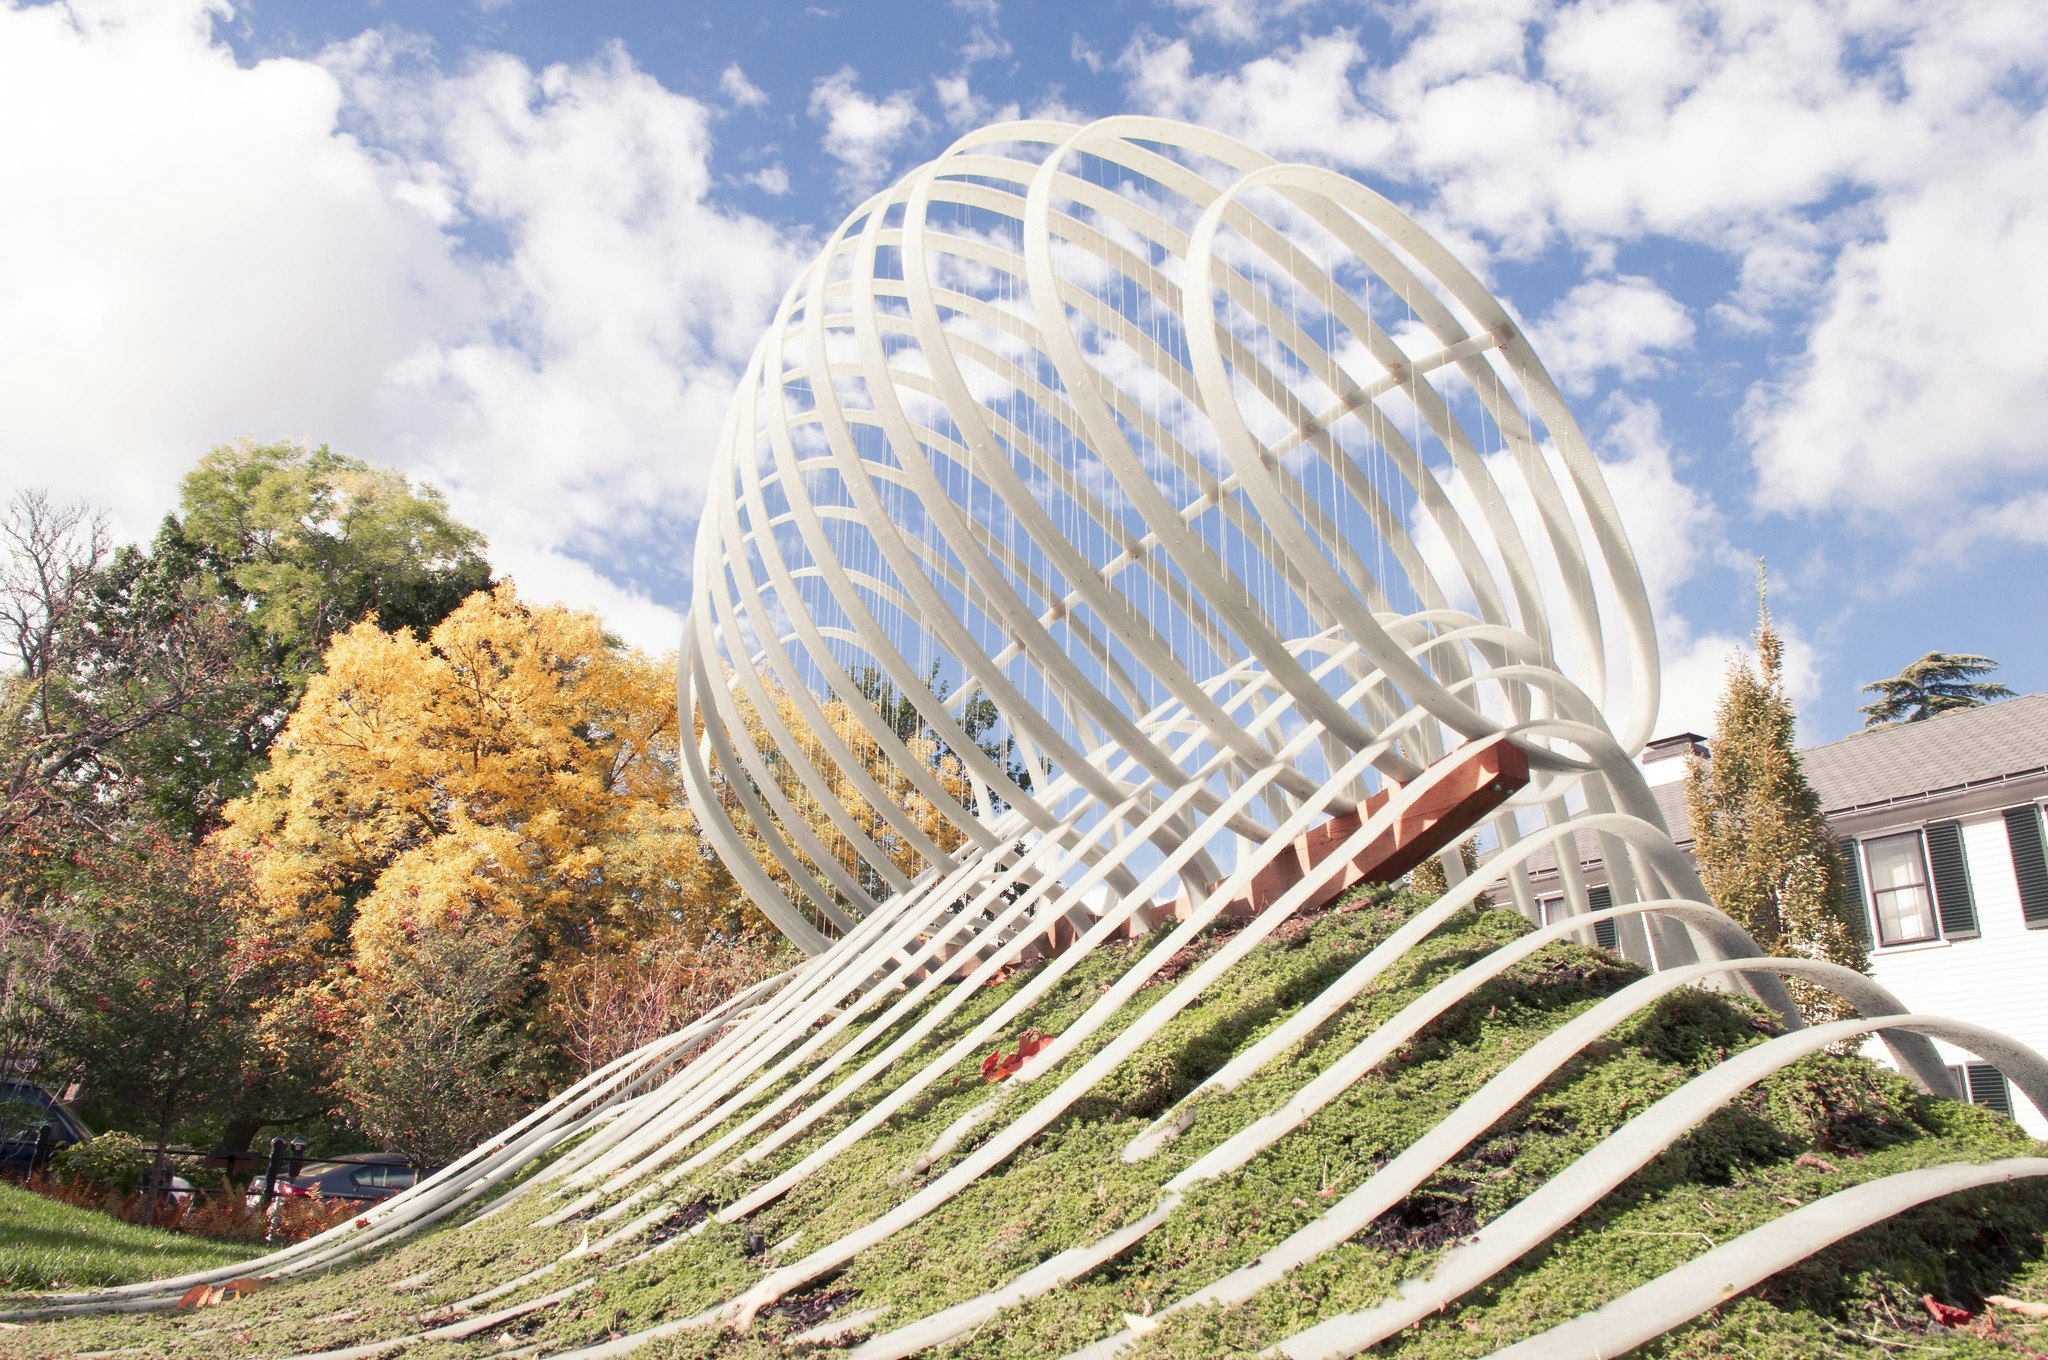 White modern art structure on a grass area. Structure is white, with horizontal grooved lines across the grass, and a sphere of these white lines resting on a small hill. View is closer to the sphere. It is the daytime, the sky is blue with white clouds.